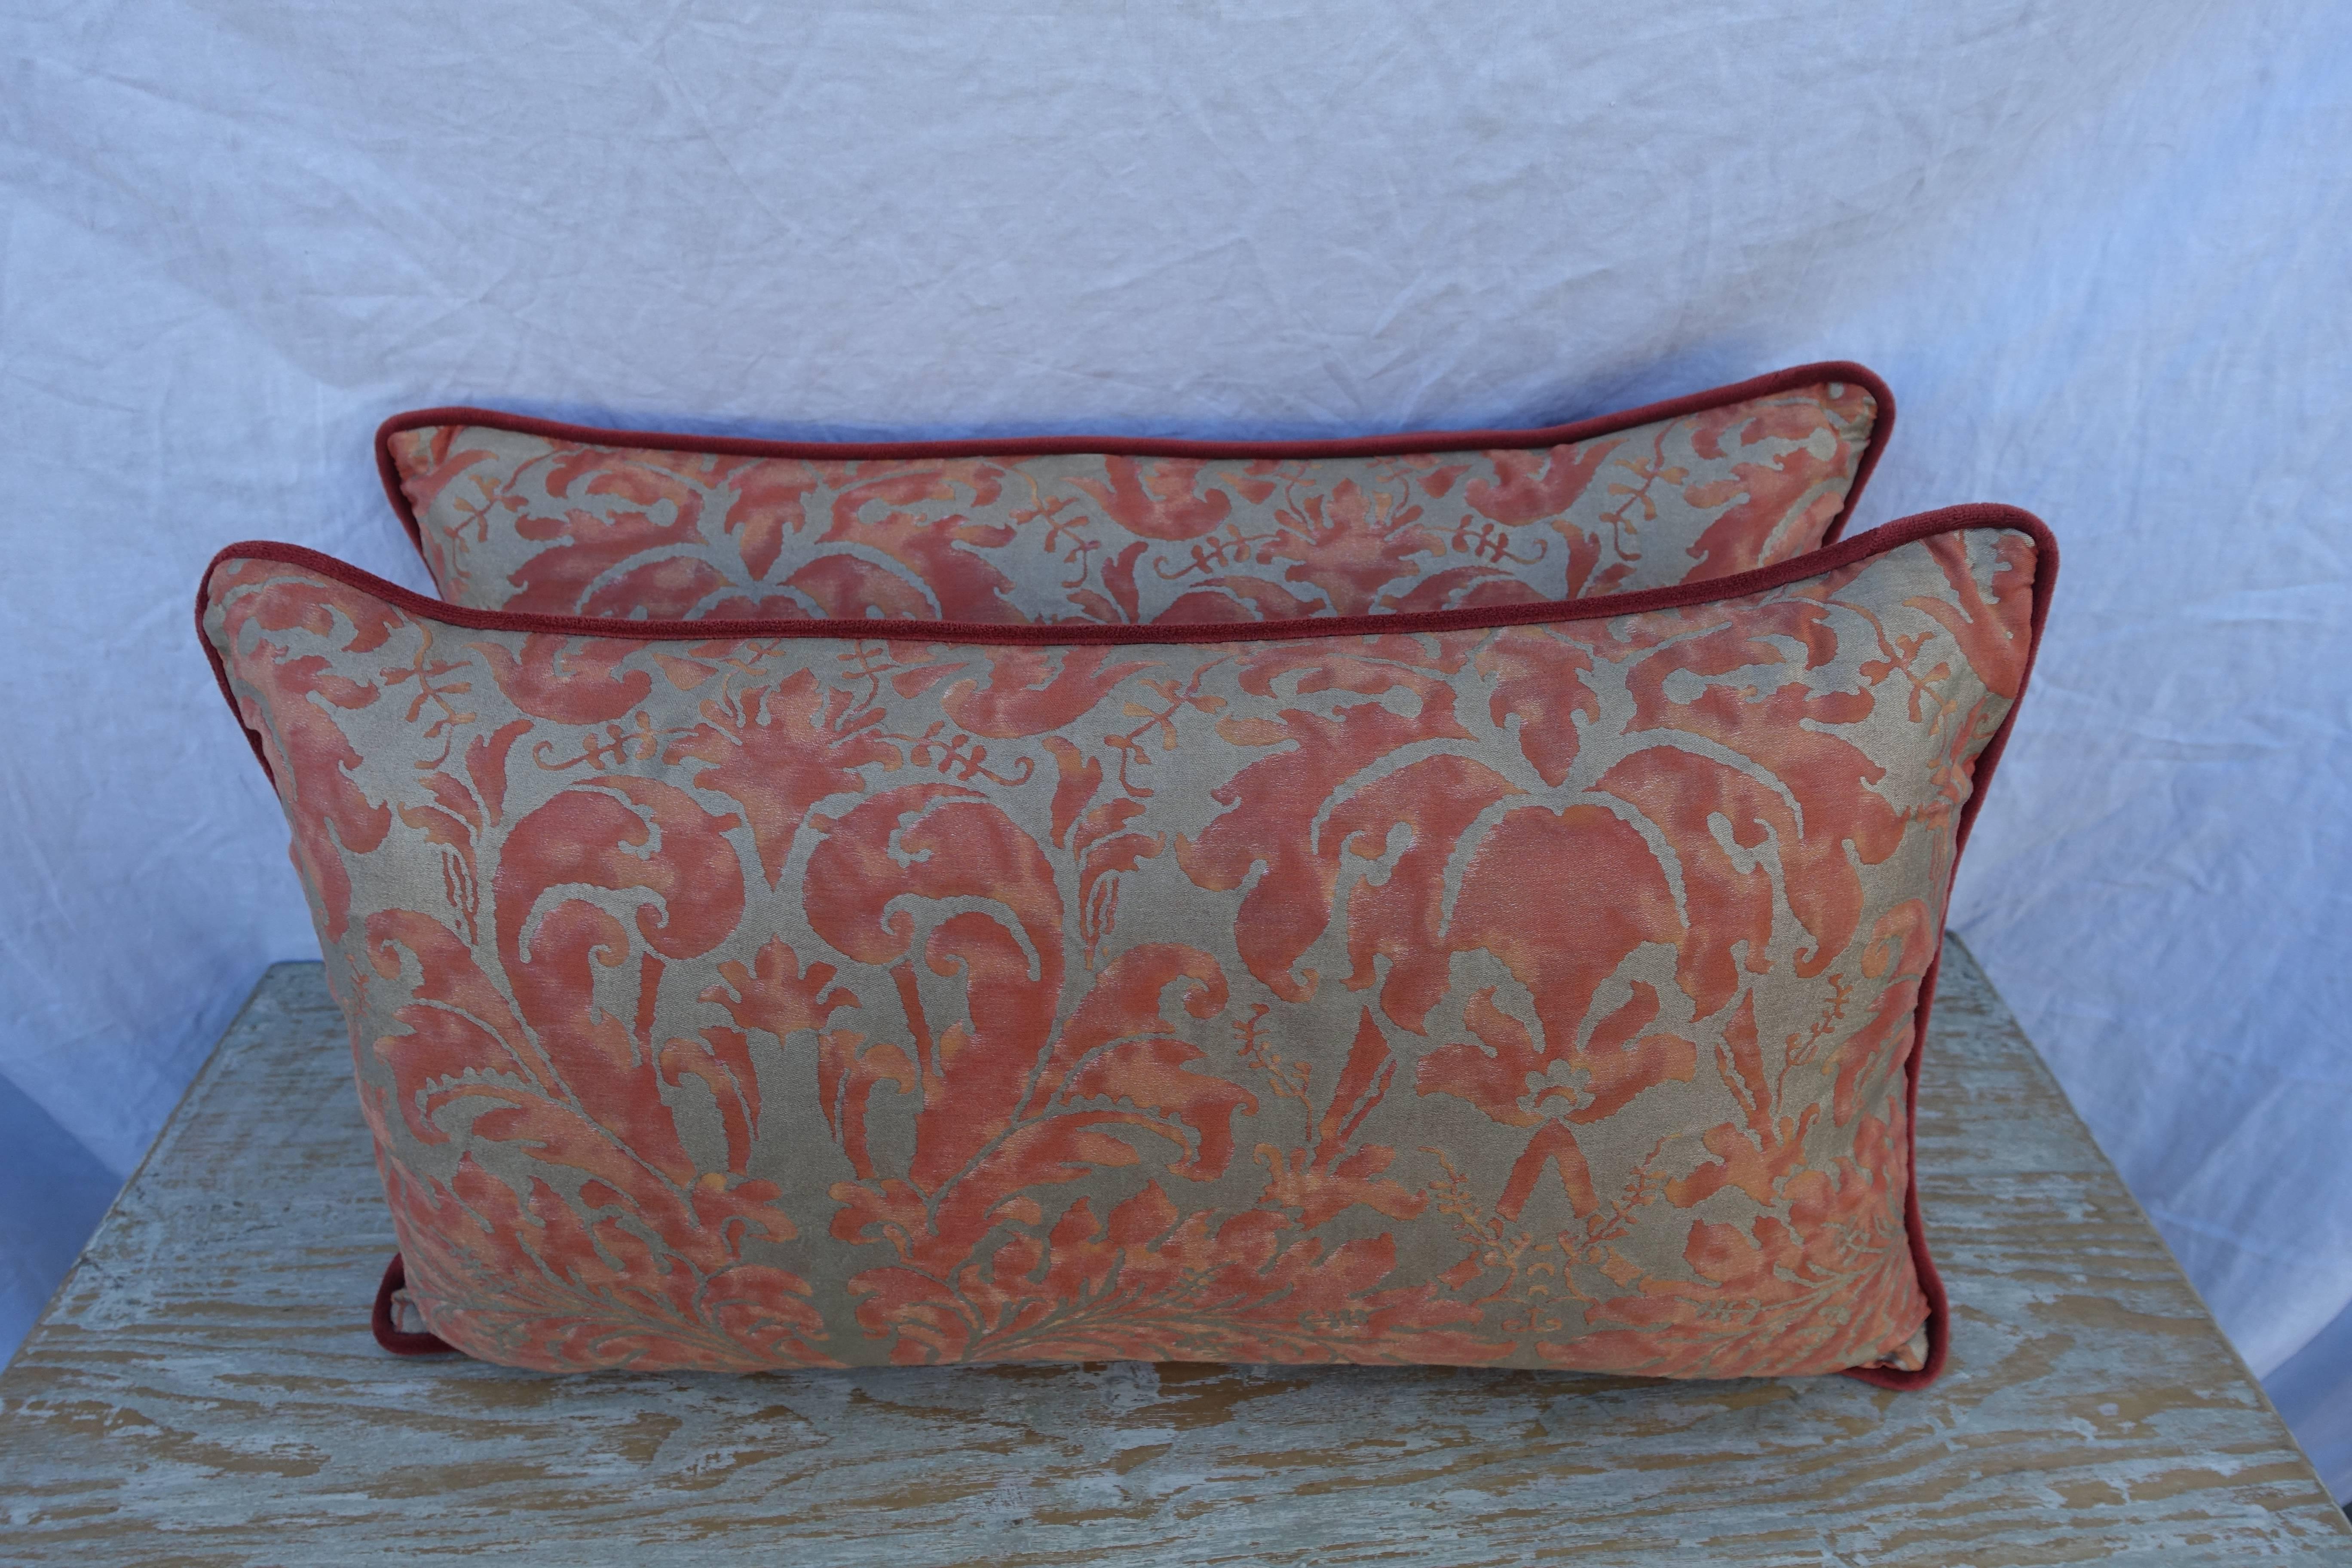 Pair of Lucrezia patterned Fortuny pillows in Bittersweet and silvery gold with coral backs and self cord detail. Down inserts, sewn closed.